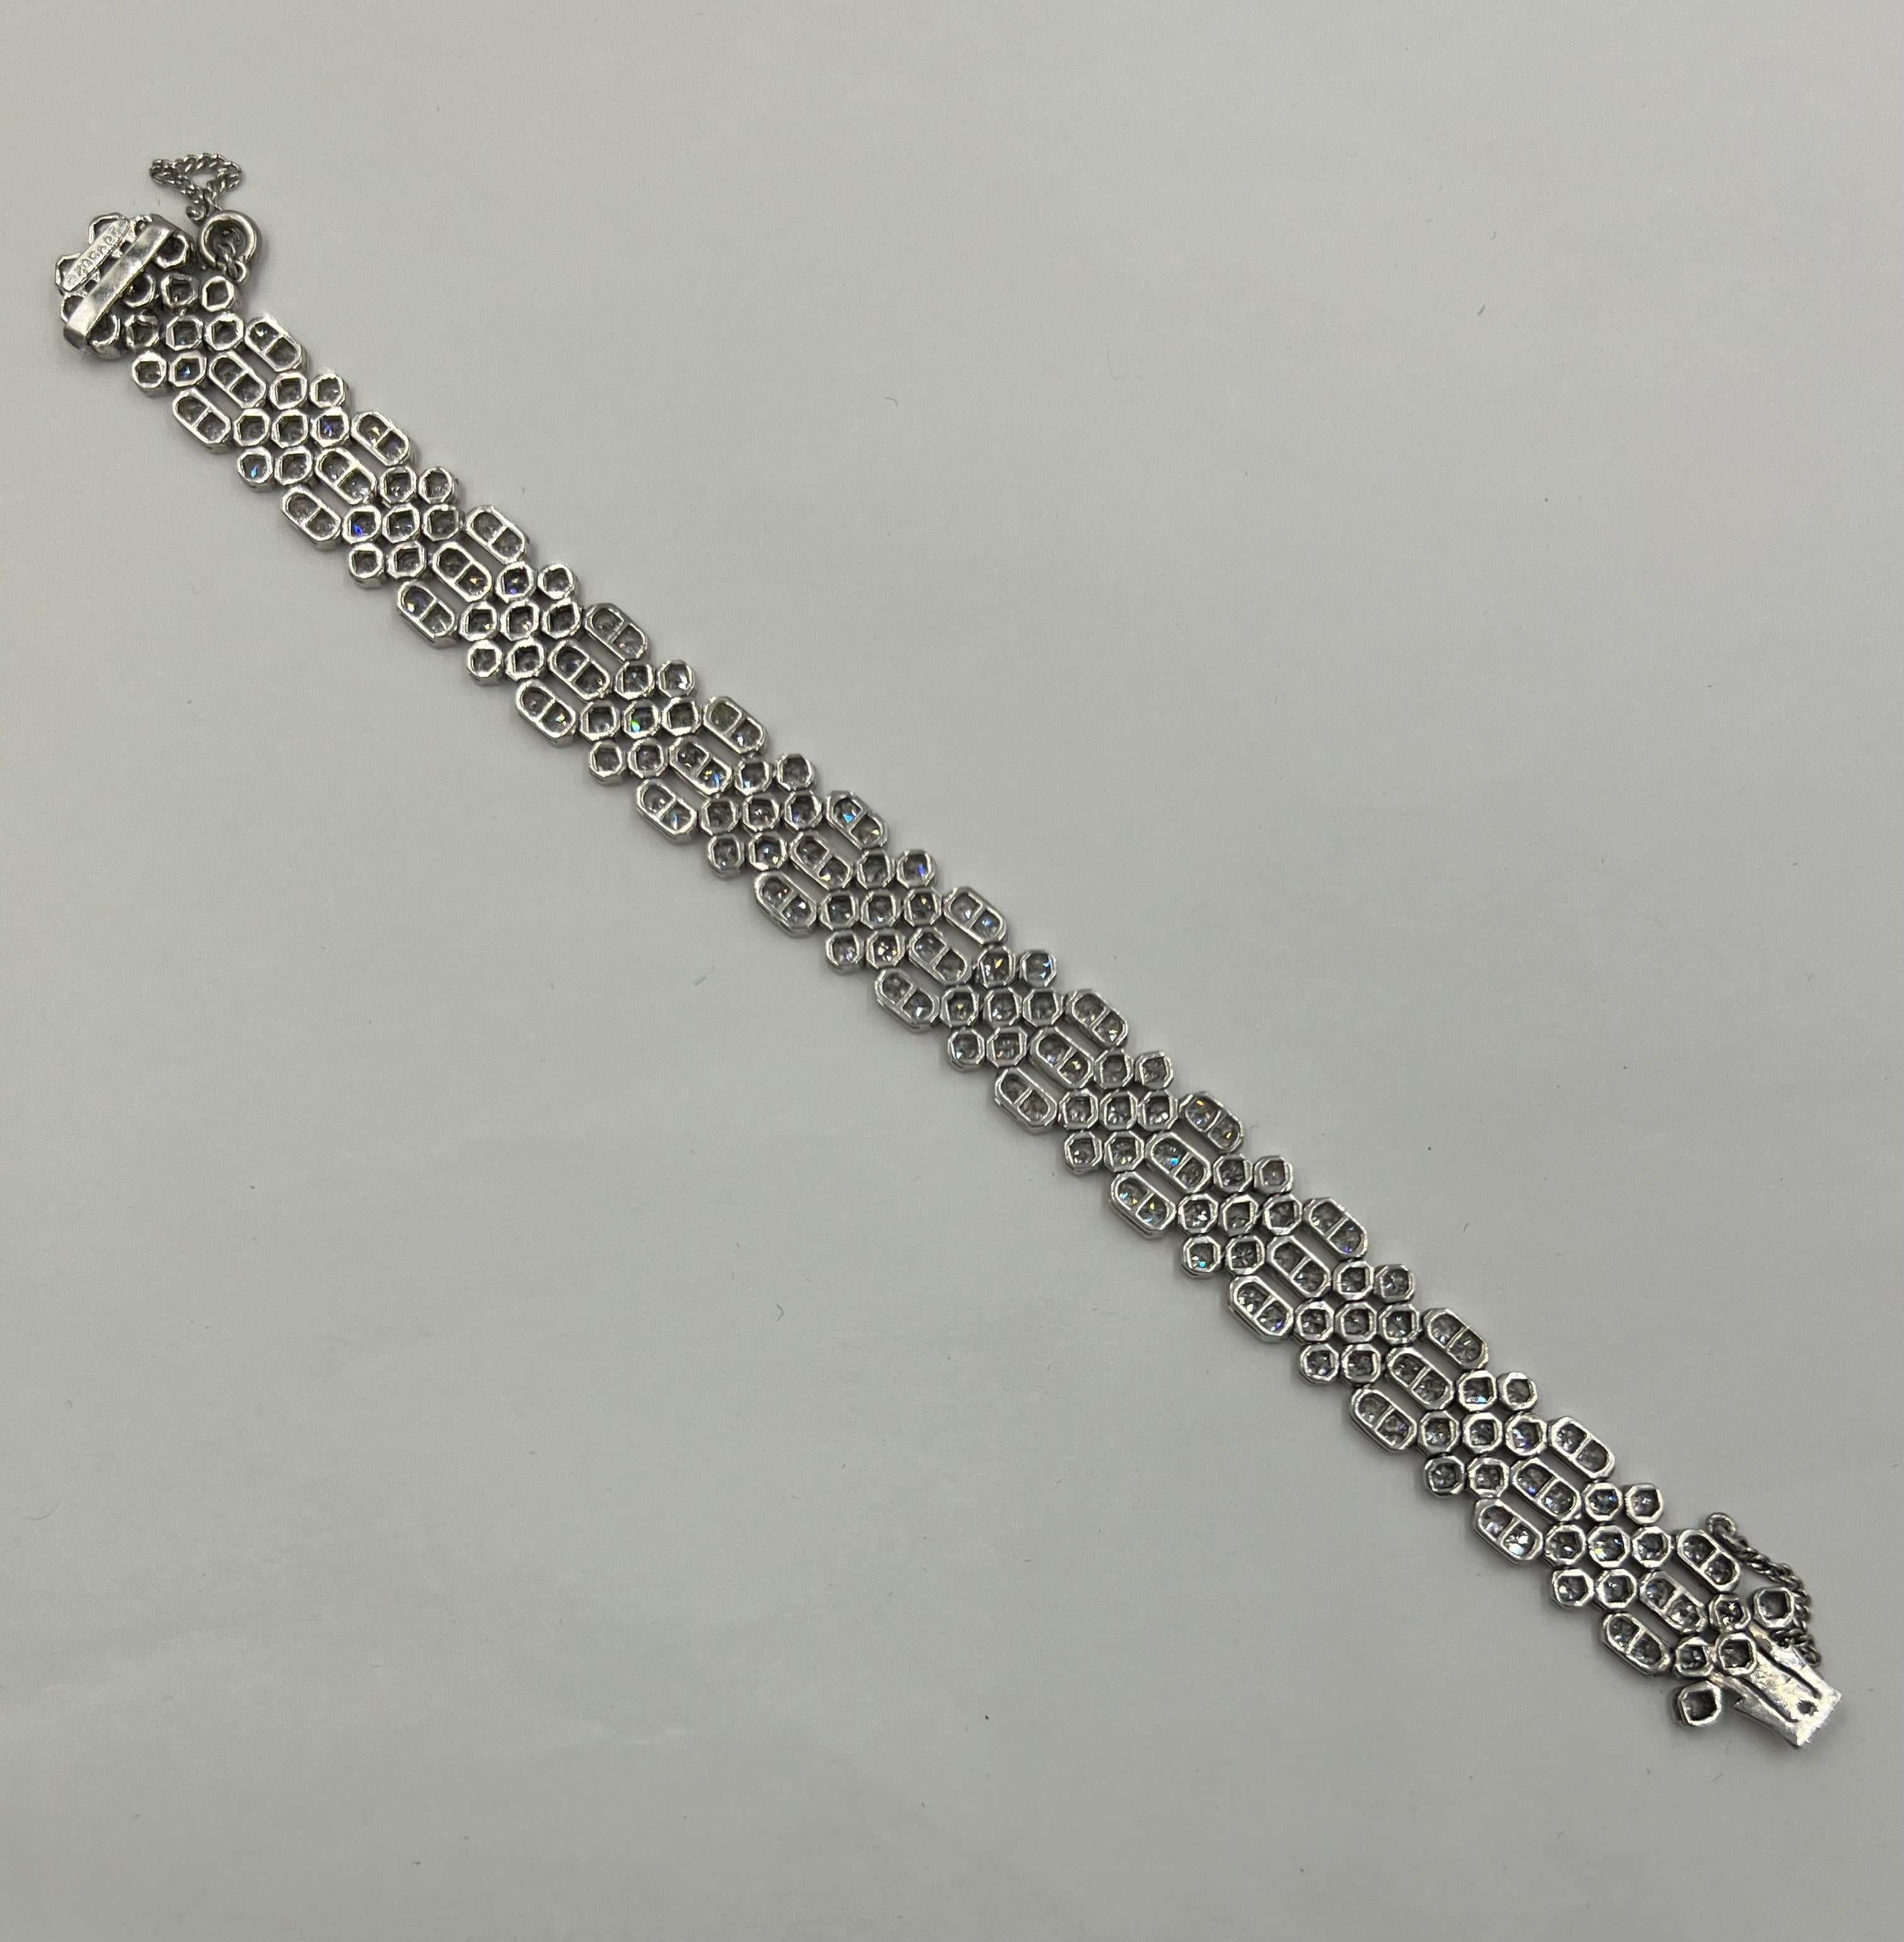 Art Deco diamond platinum bracelet, circa 1930.

This Art Deco Diamond Platinum Bracelet is a stunning piece of jewelry that epitomizes the elegance and sophistication of the Art Deco era. Crafted with precision and attention to detail, this